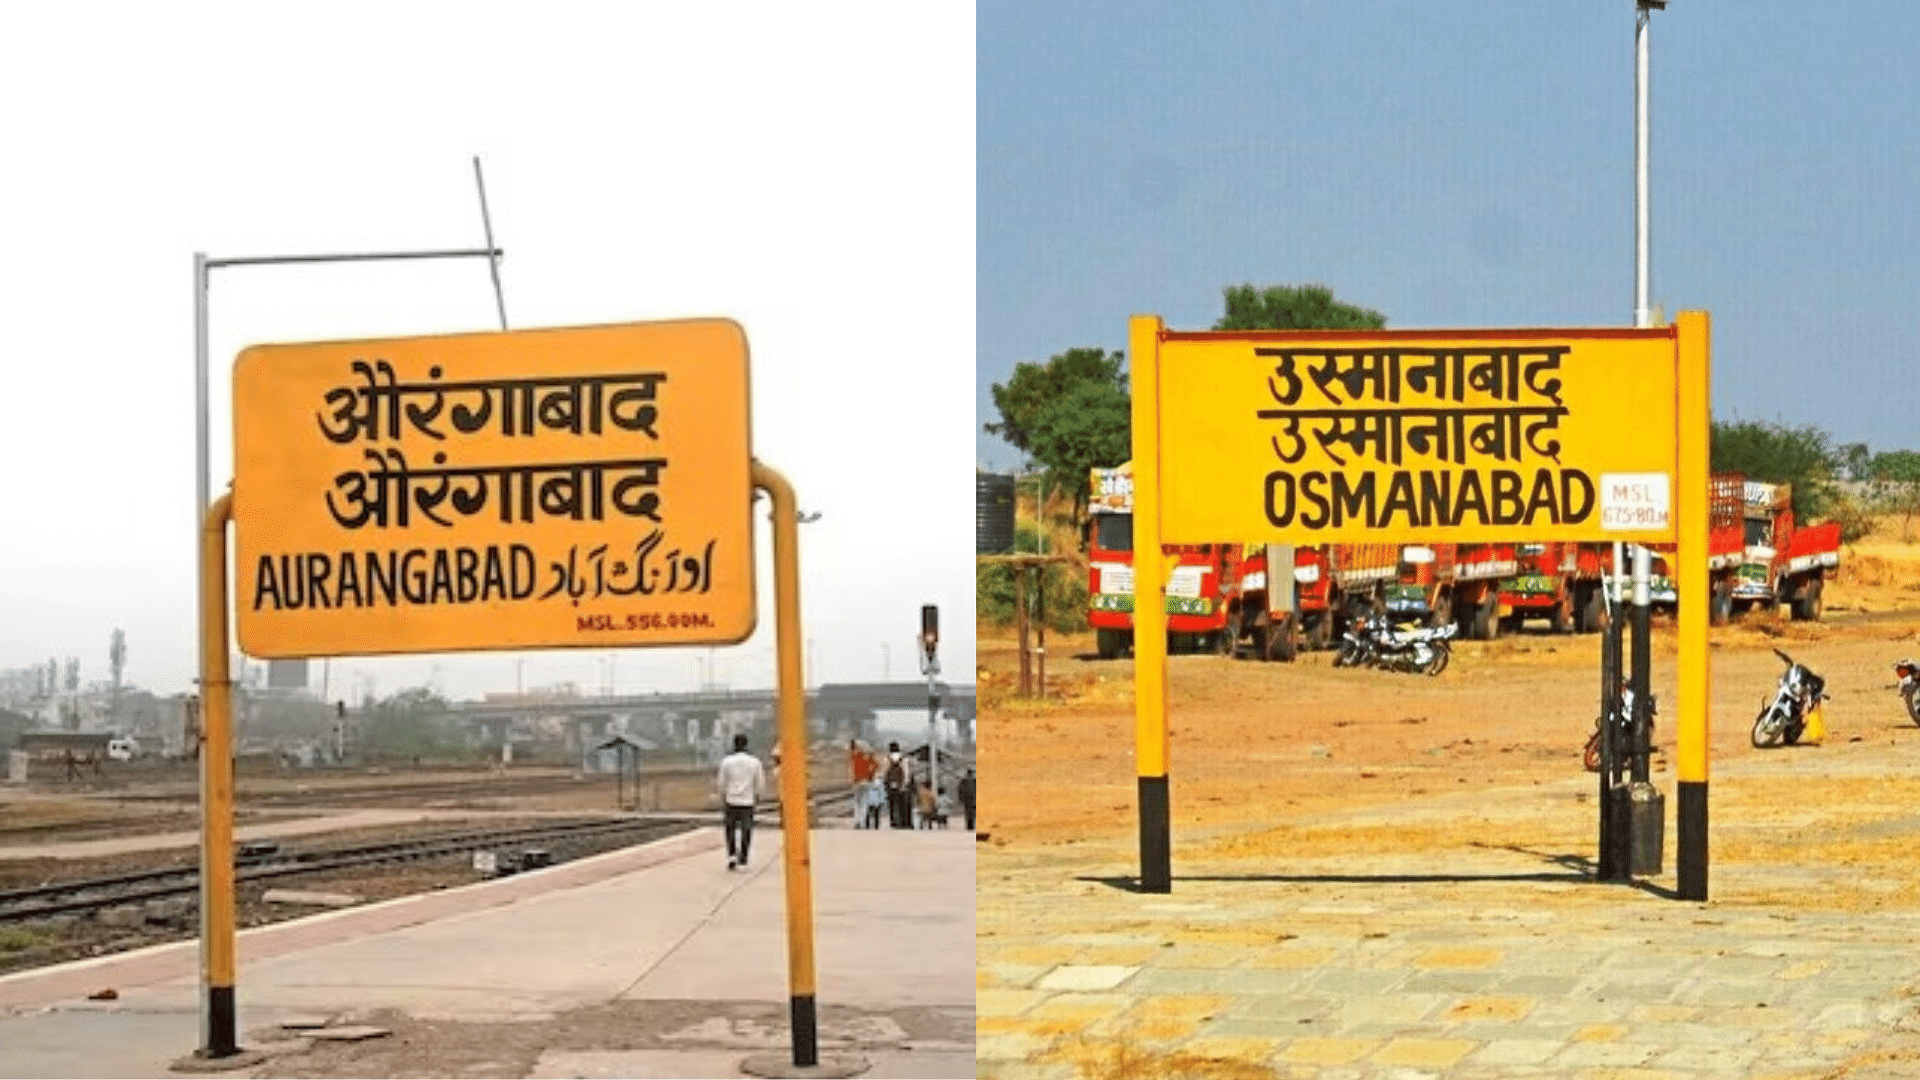 <div class="paragraphs"><p>The decision to rename Aurangabad and&nbsp;Osmanabad was taken in the previous Maha Vikas Aghadi (MVA) government's last cabinet meeting chaired by the then chief minister Uddhav Thackeray on 29 June 2022, just before he resigned.</p></div>